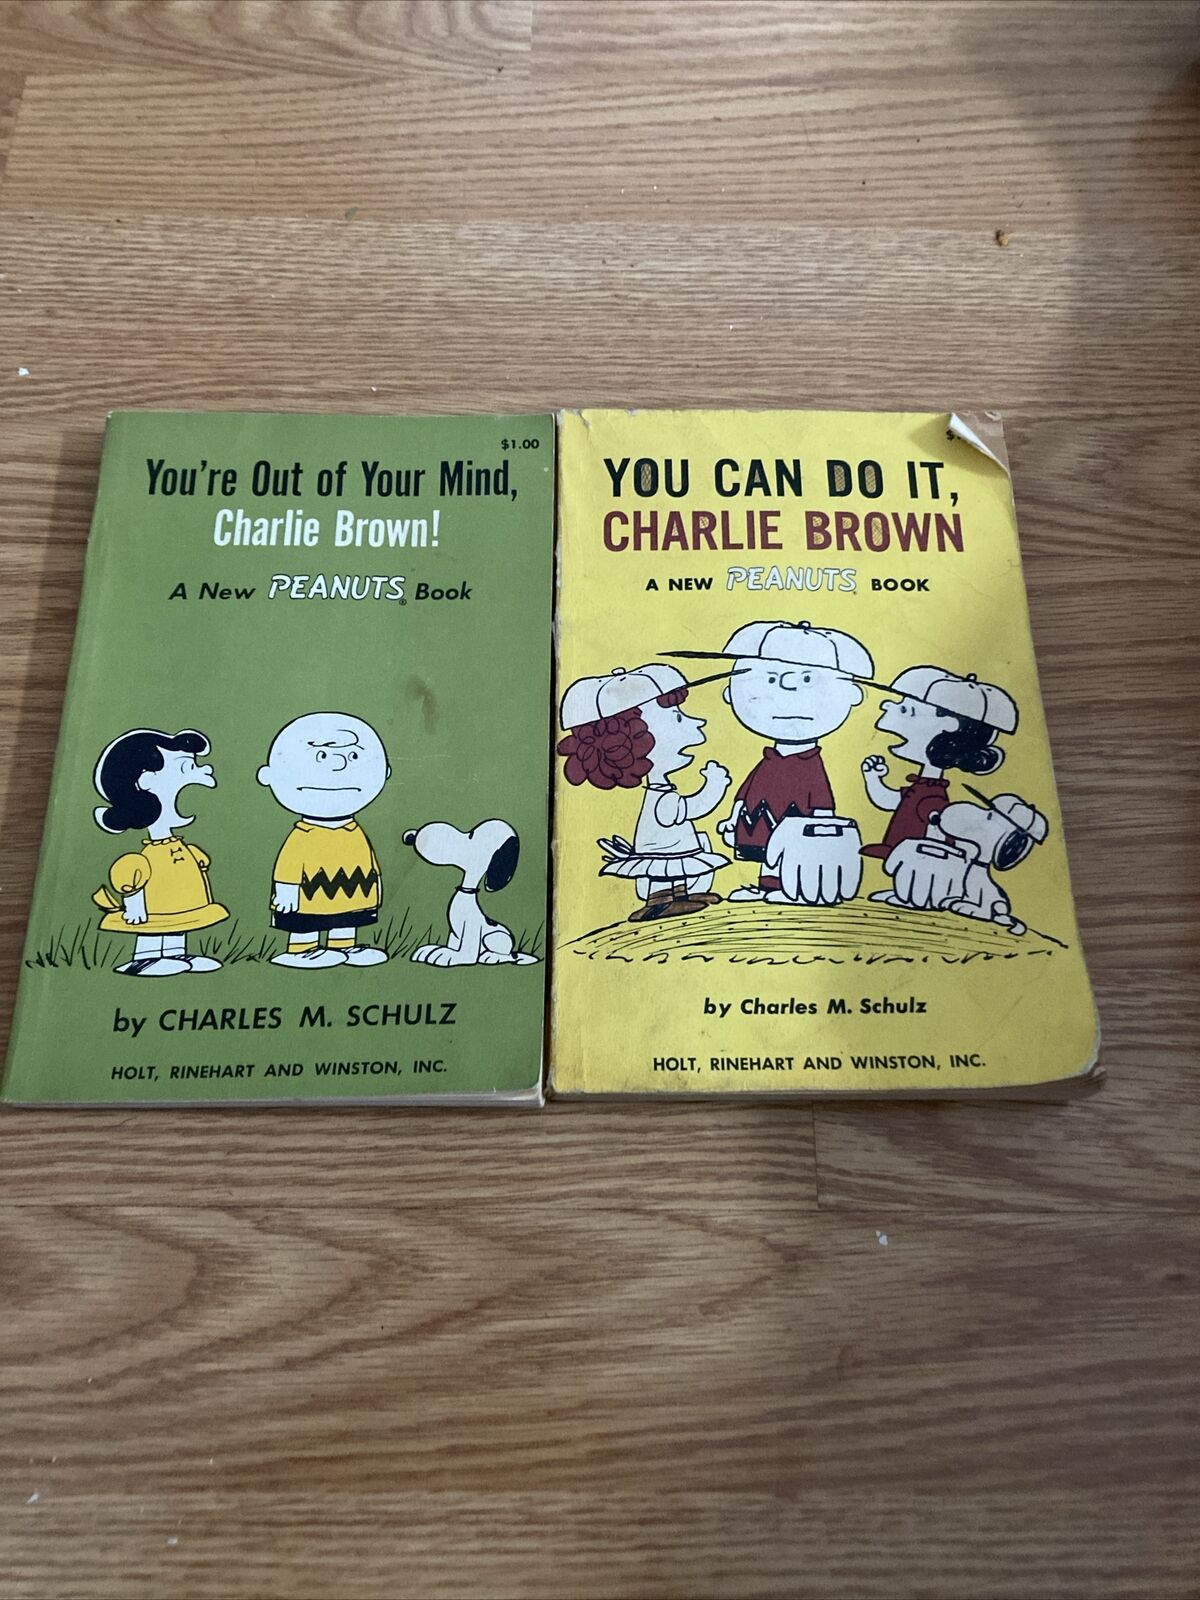 Vintage Charlie Brown, Peanuts Paperback Books From The 1960s